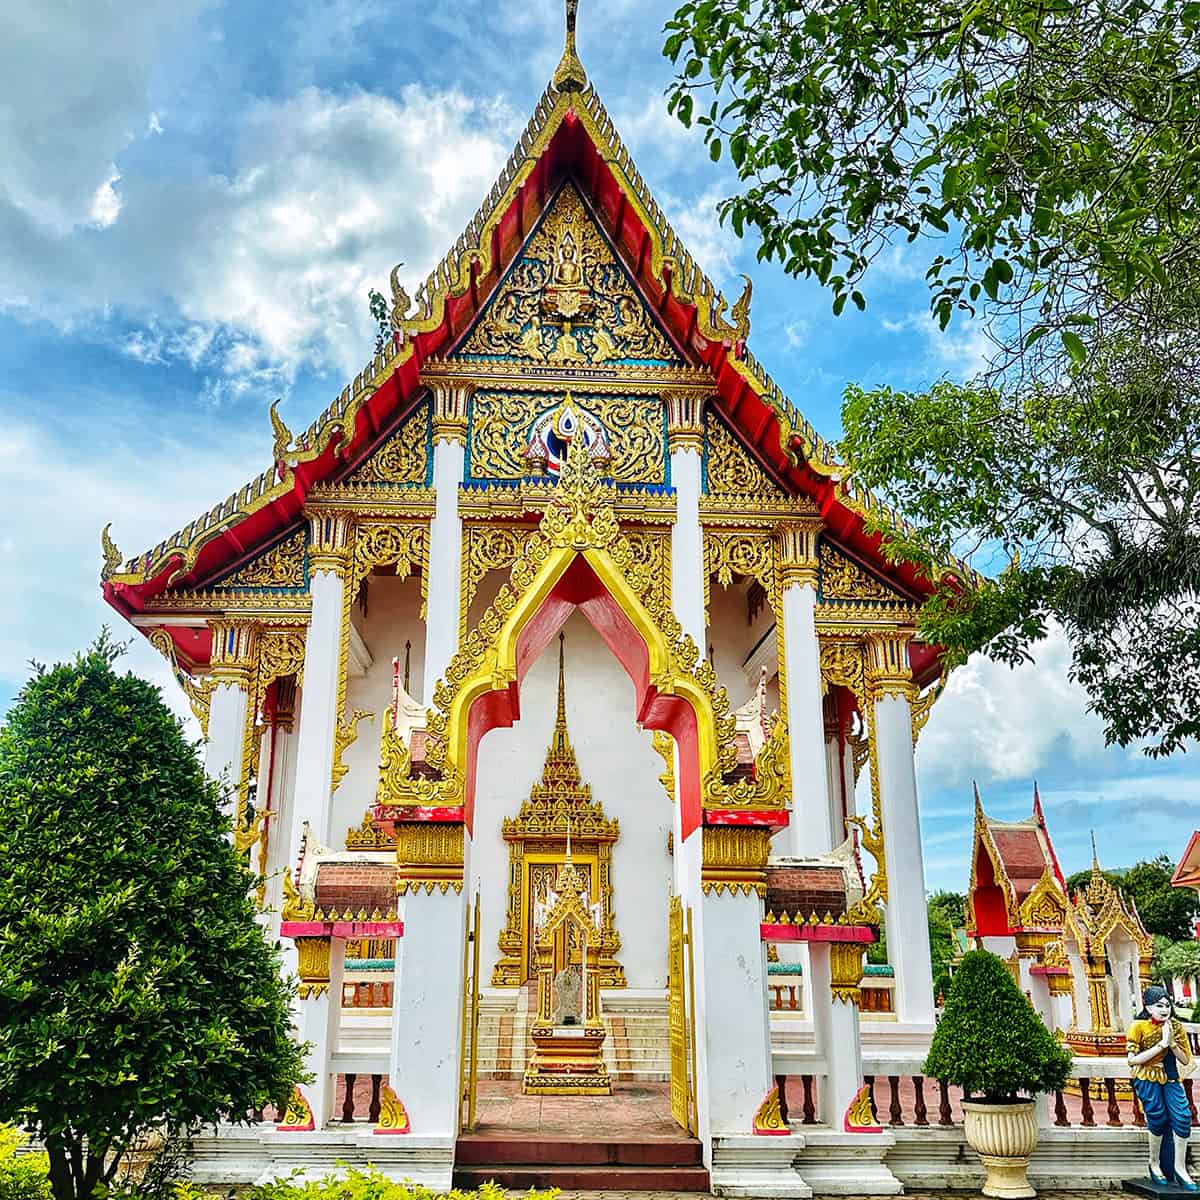 The Prayer Hall of Wat Chalong temple in Phuket, Thailand.